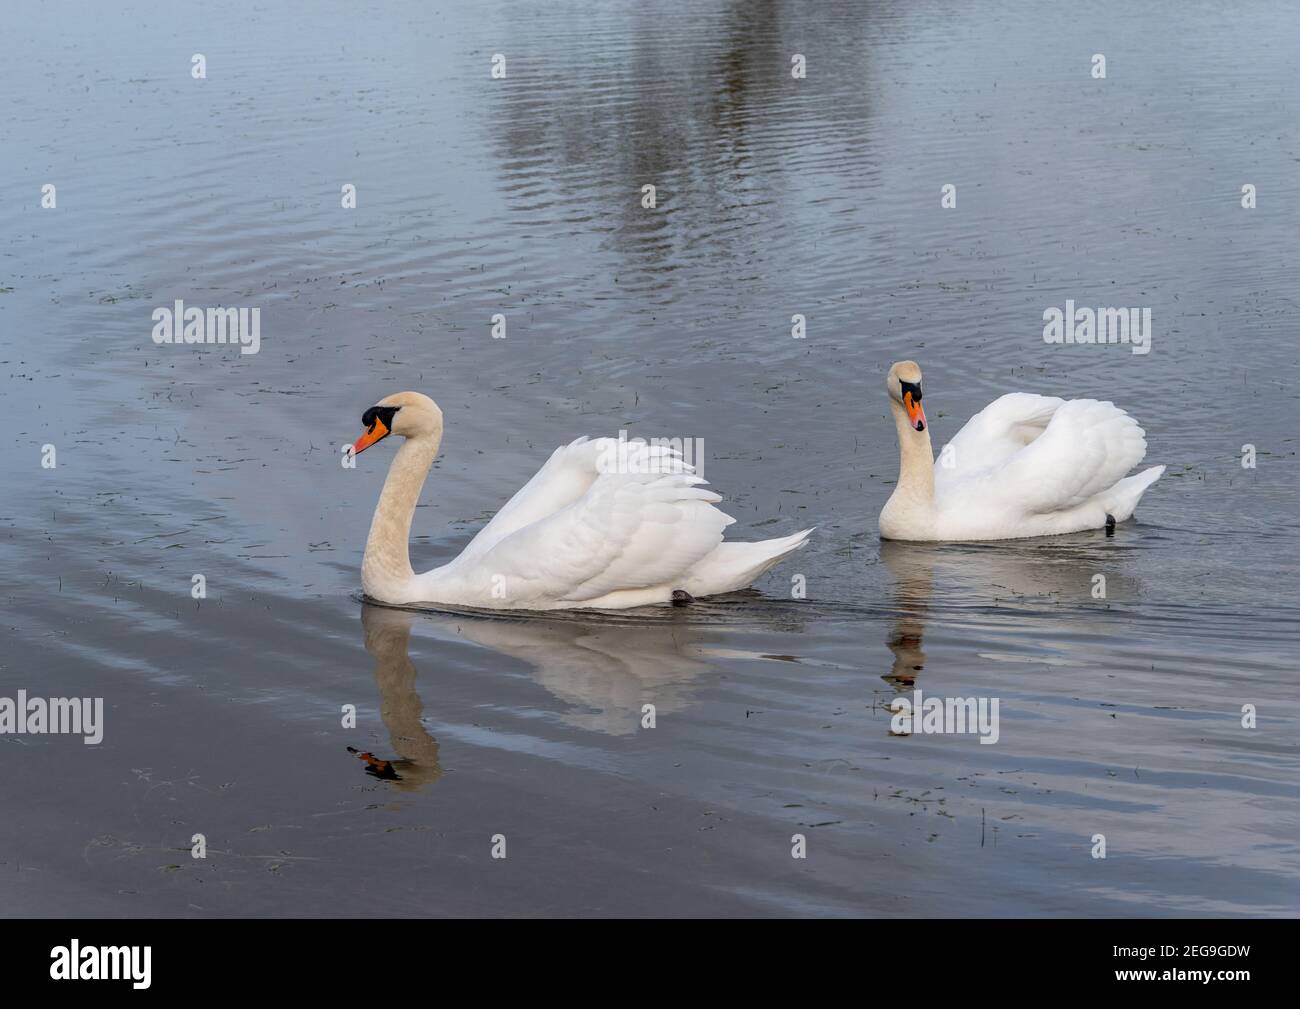 Two swans swiming on a flooded field on a clear day with reflections in the water. Stock Photo